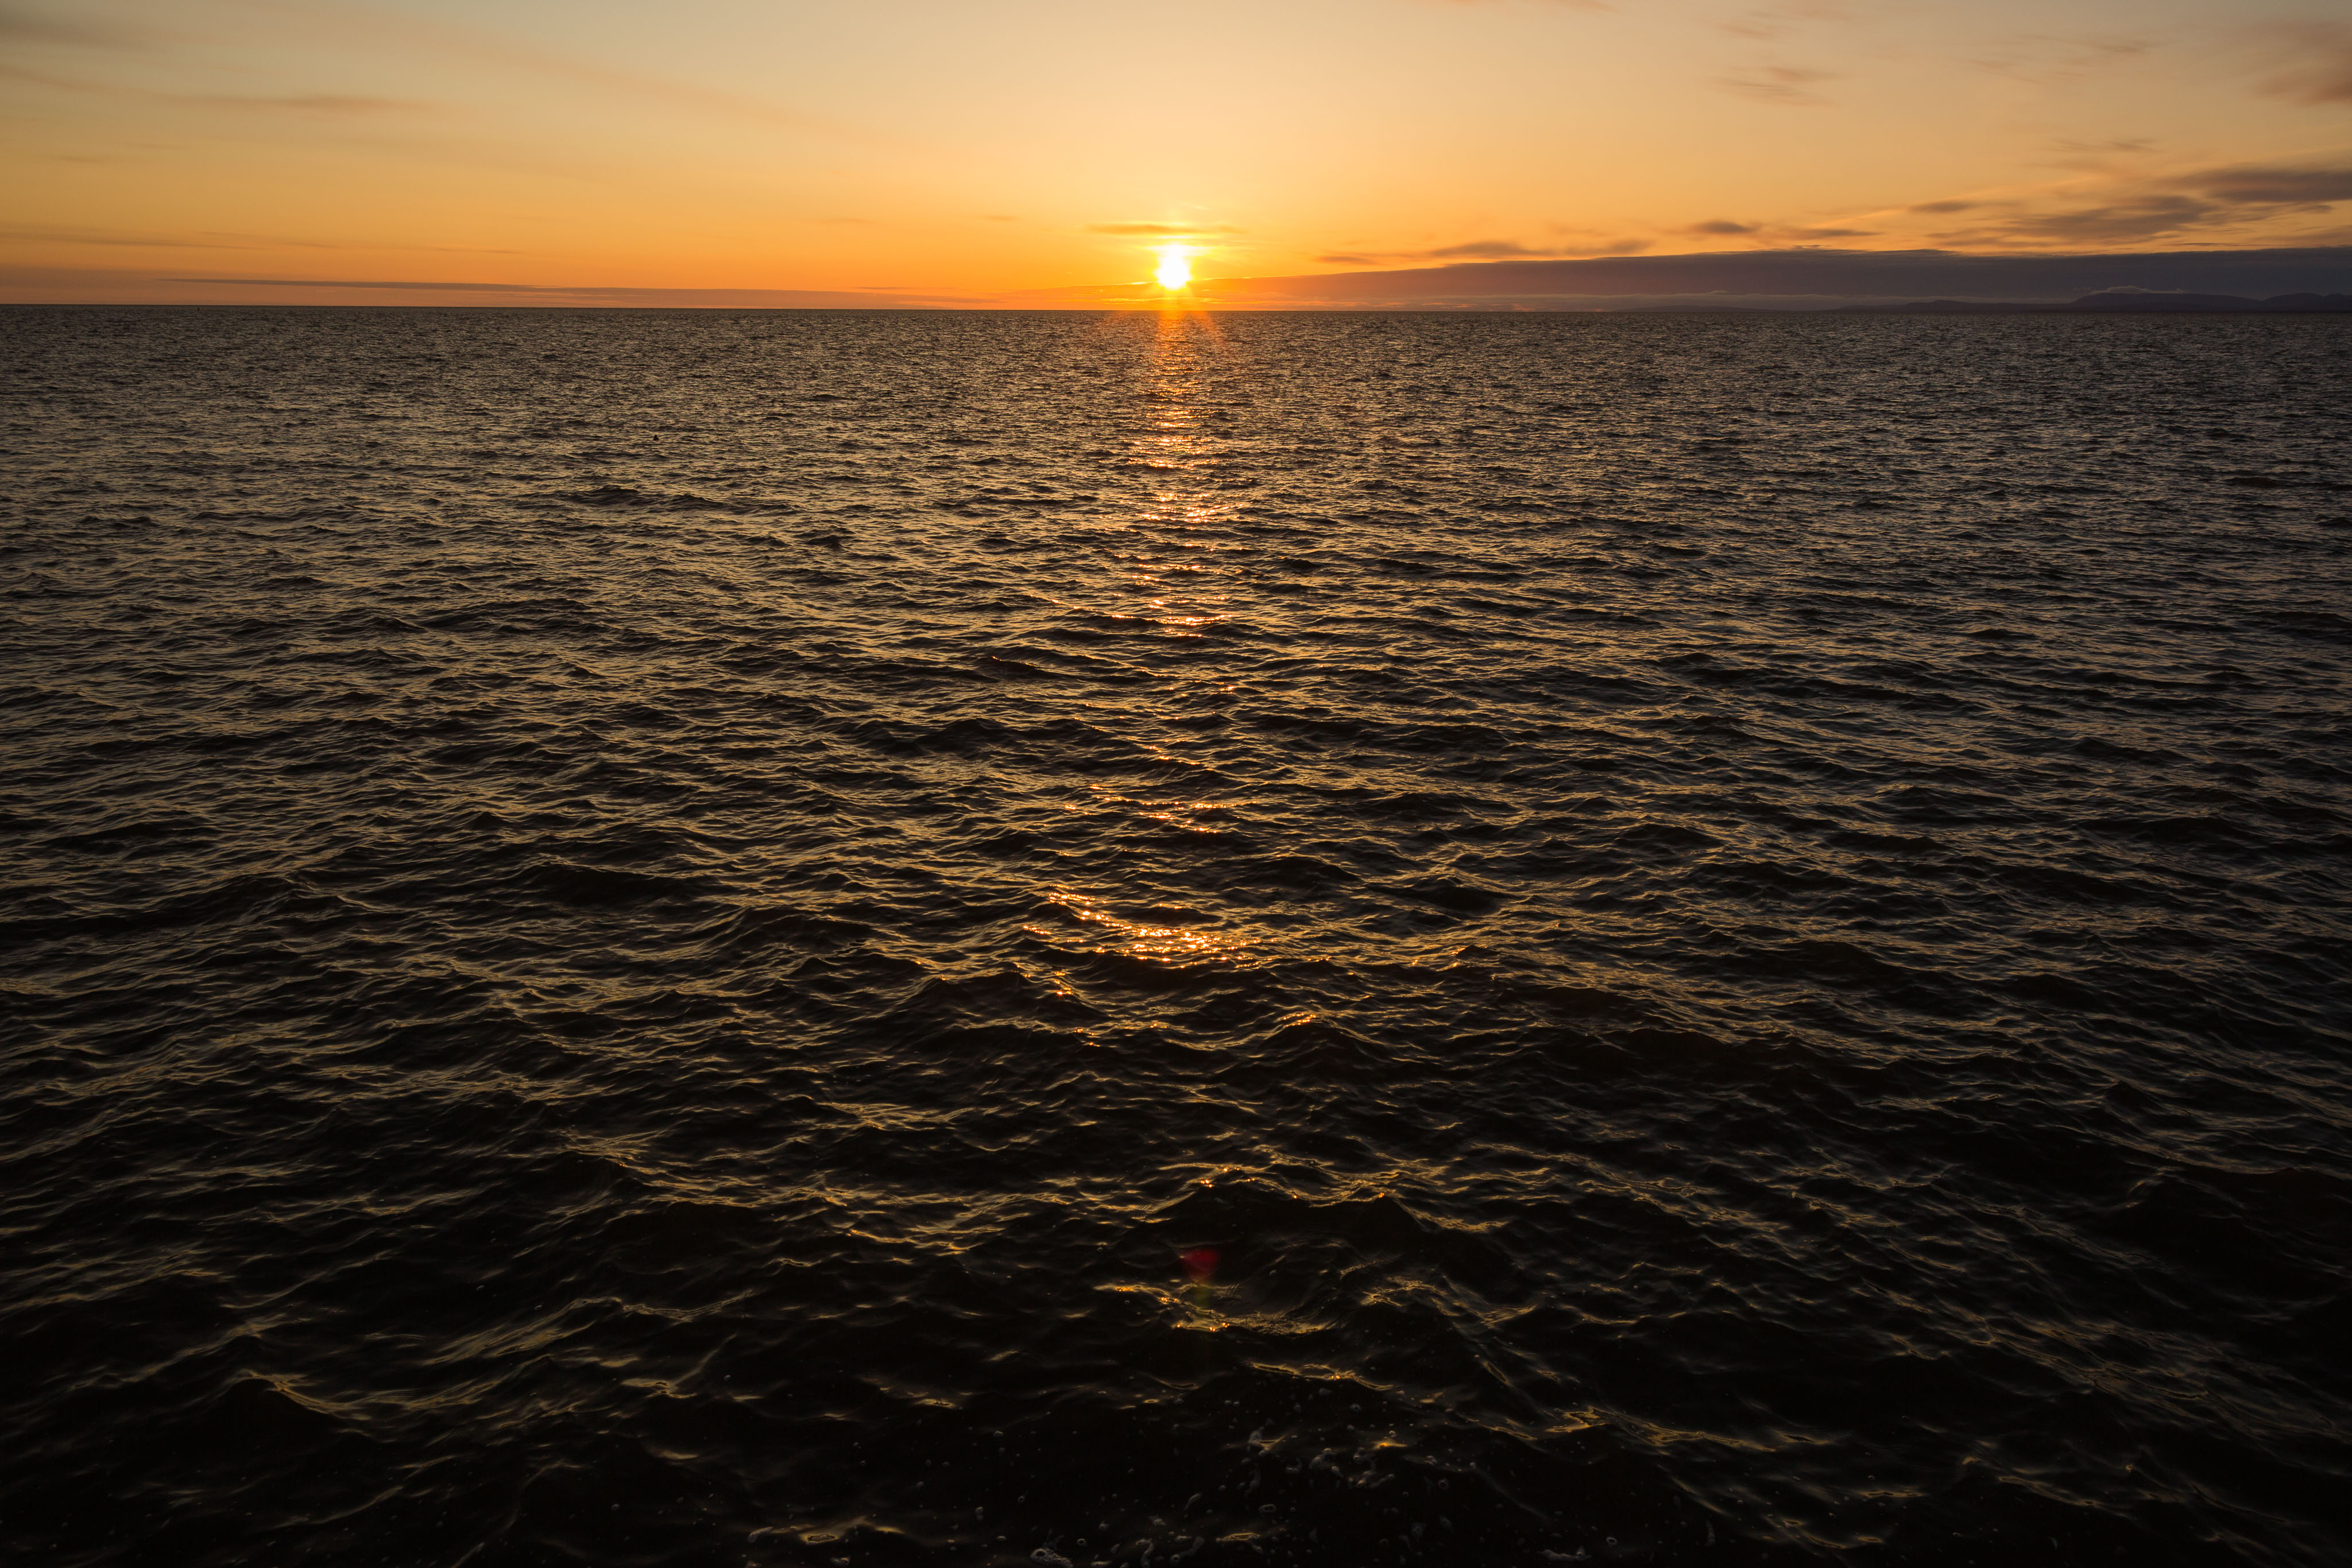 Sunset on the Chukchi Sea in Kotzebue on Monday, August 31, 2015. President Obama will visit the Northwest Arctic community on Wednesday, the first time a president will set foot in the American Arctic. (Loren Holmes / Alaska Dispatch News)